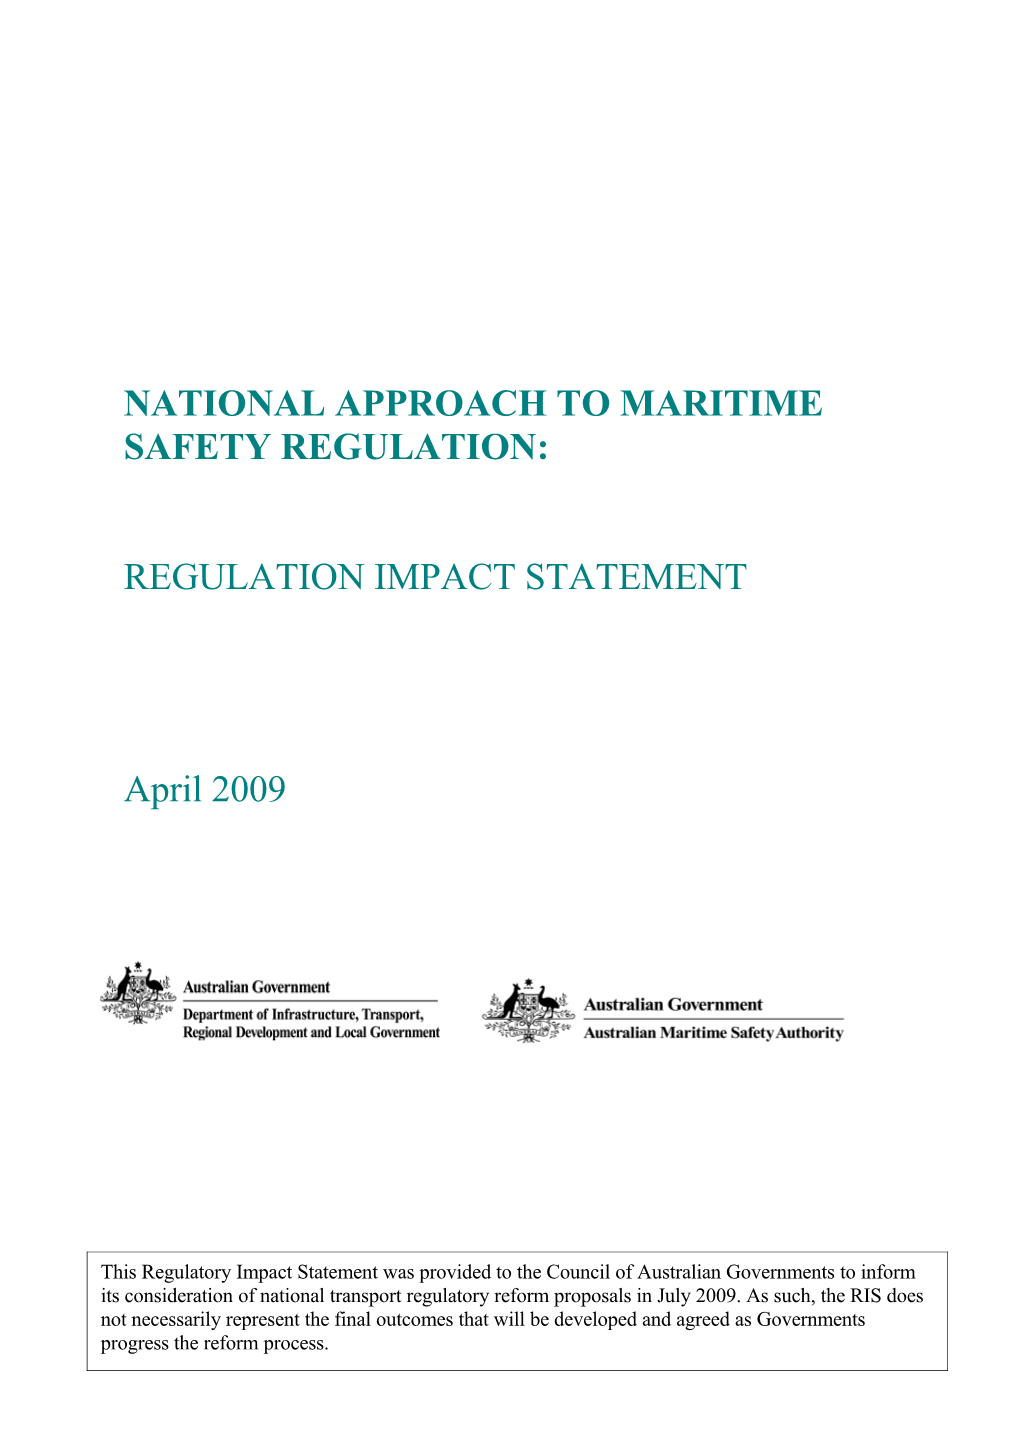 National Approach to Maritime Safety Regulation